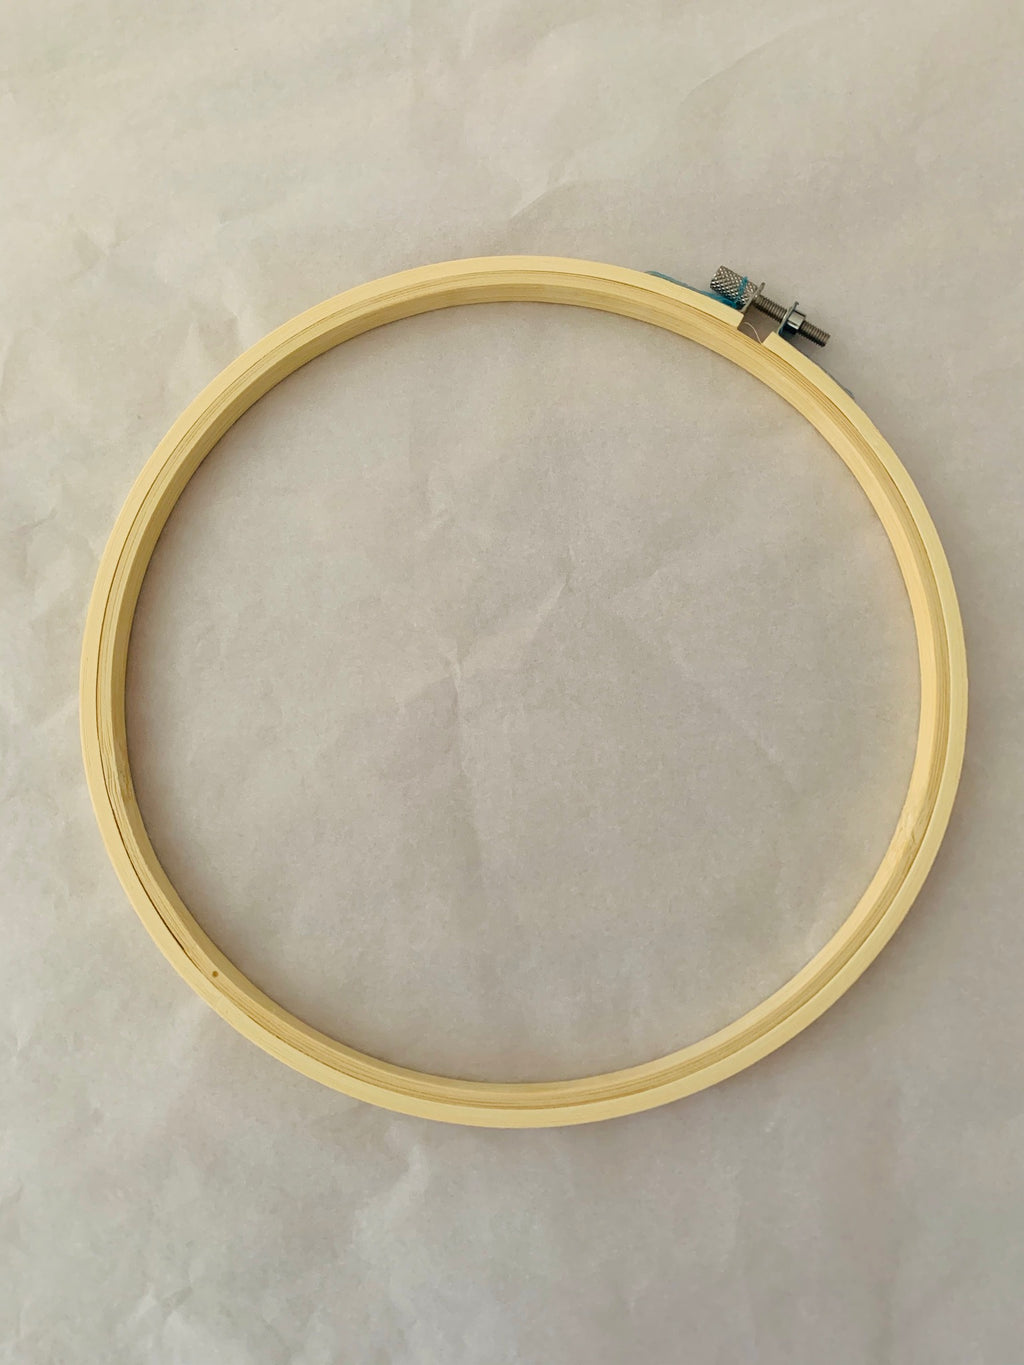 XL bamboo embroidery hoop 10”